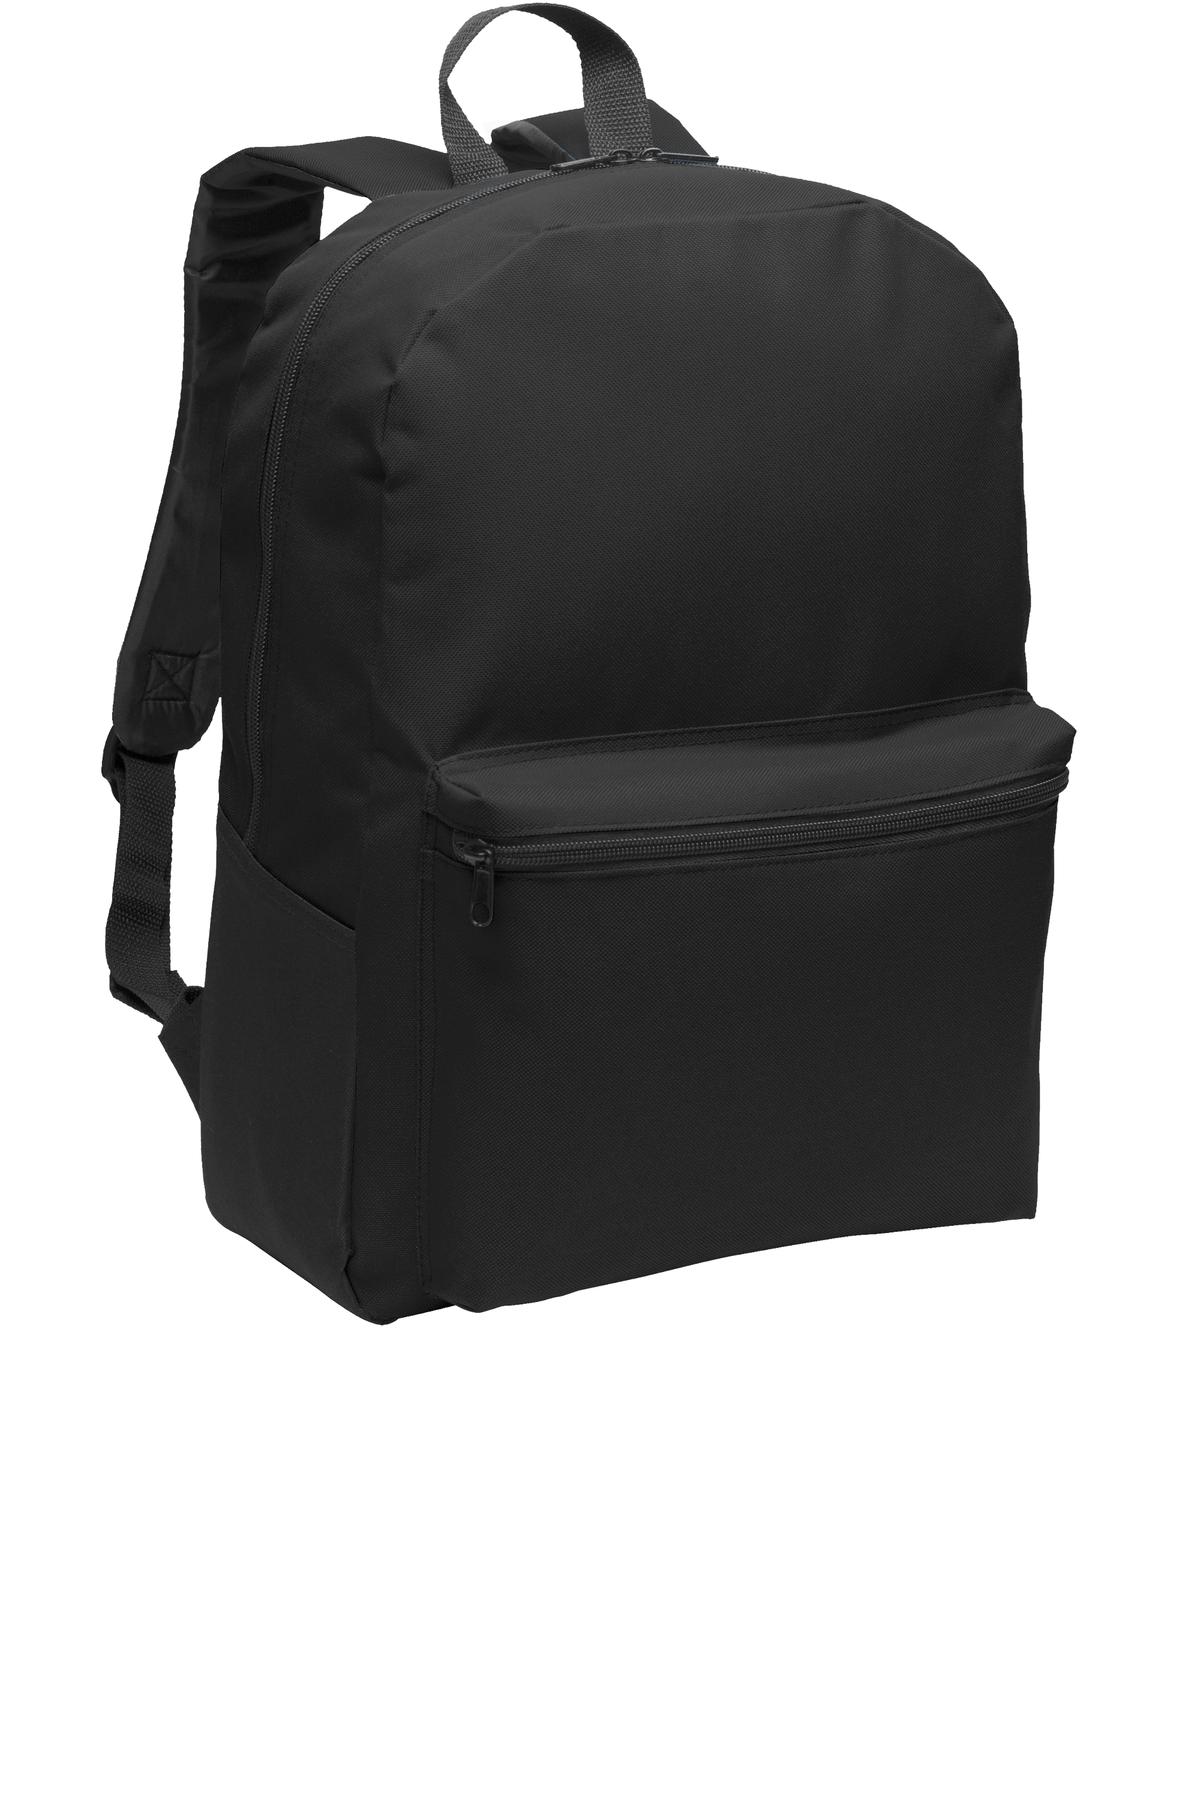 Port Authority Value Backpack-Port Authority